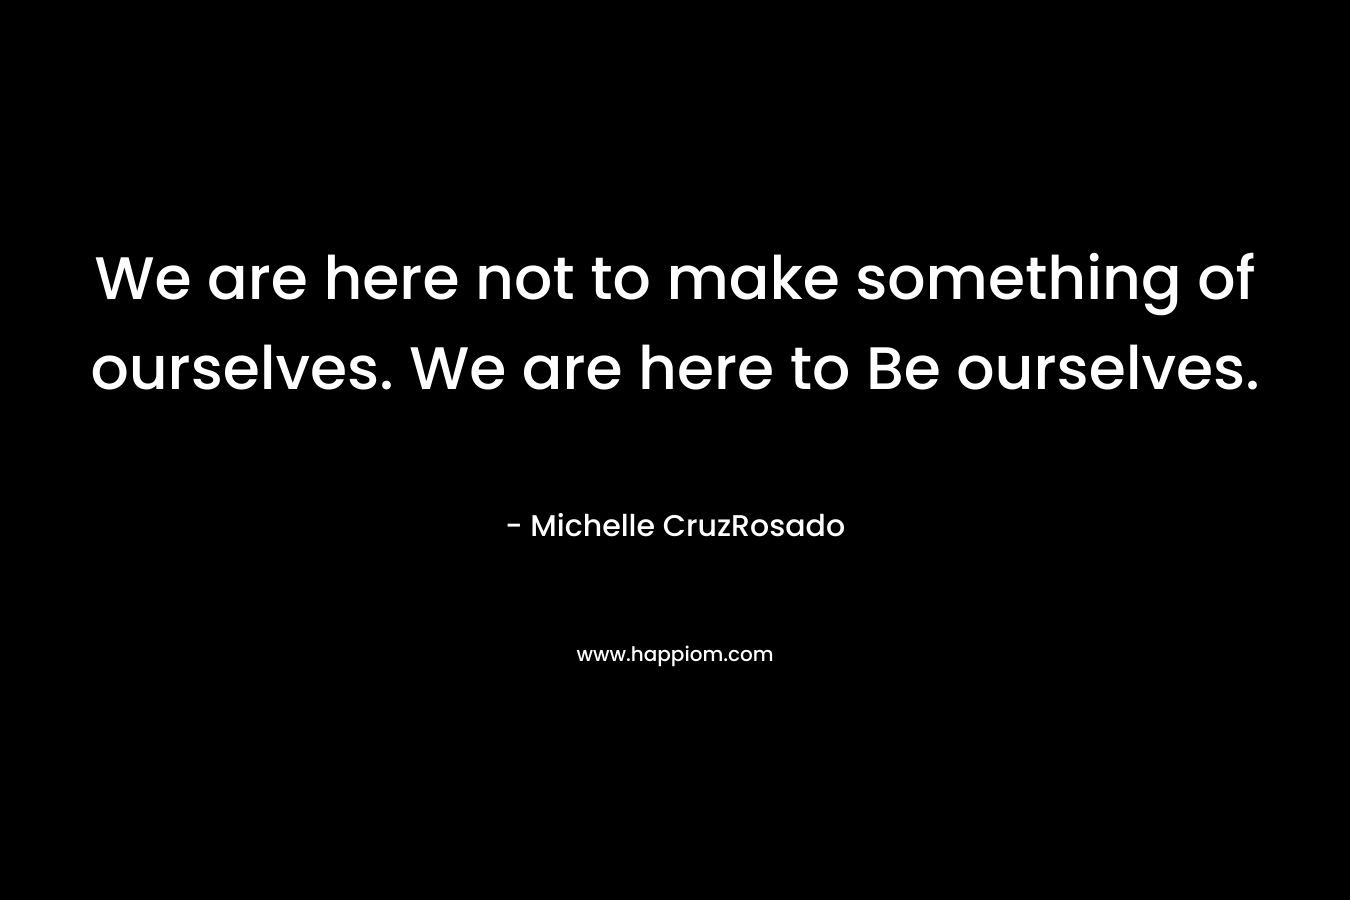 We are here not to make something of ourselves. We are here to Be ourselves.